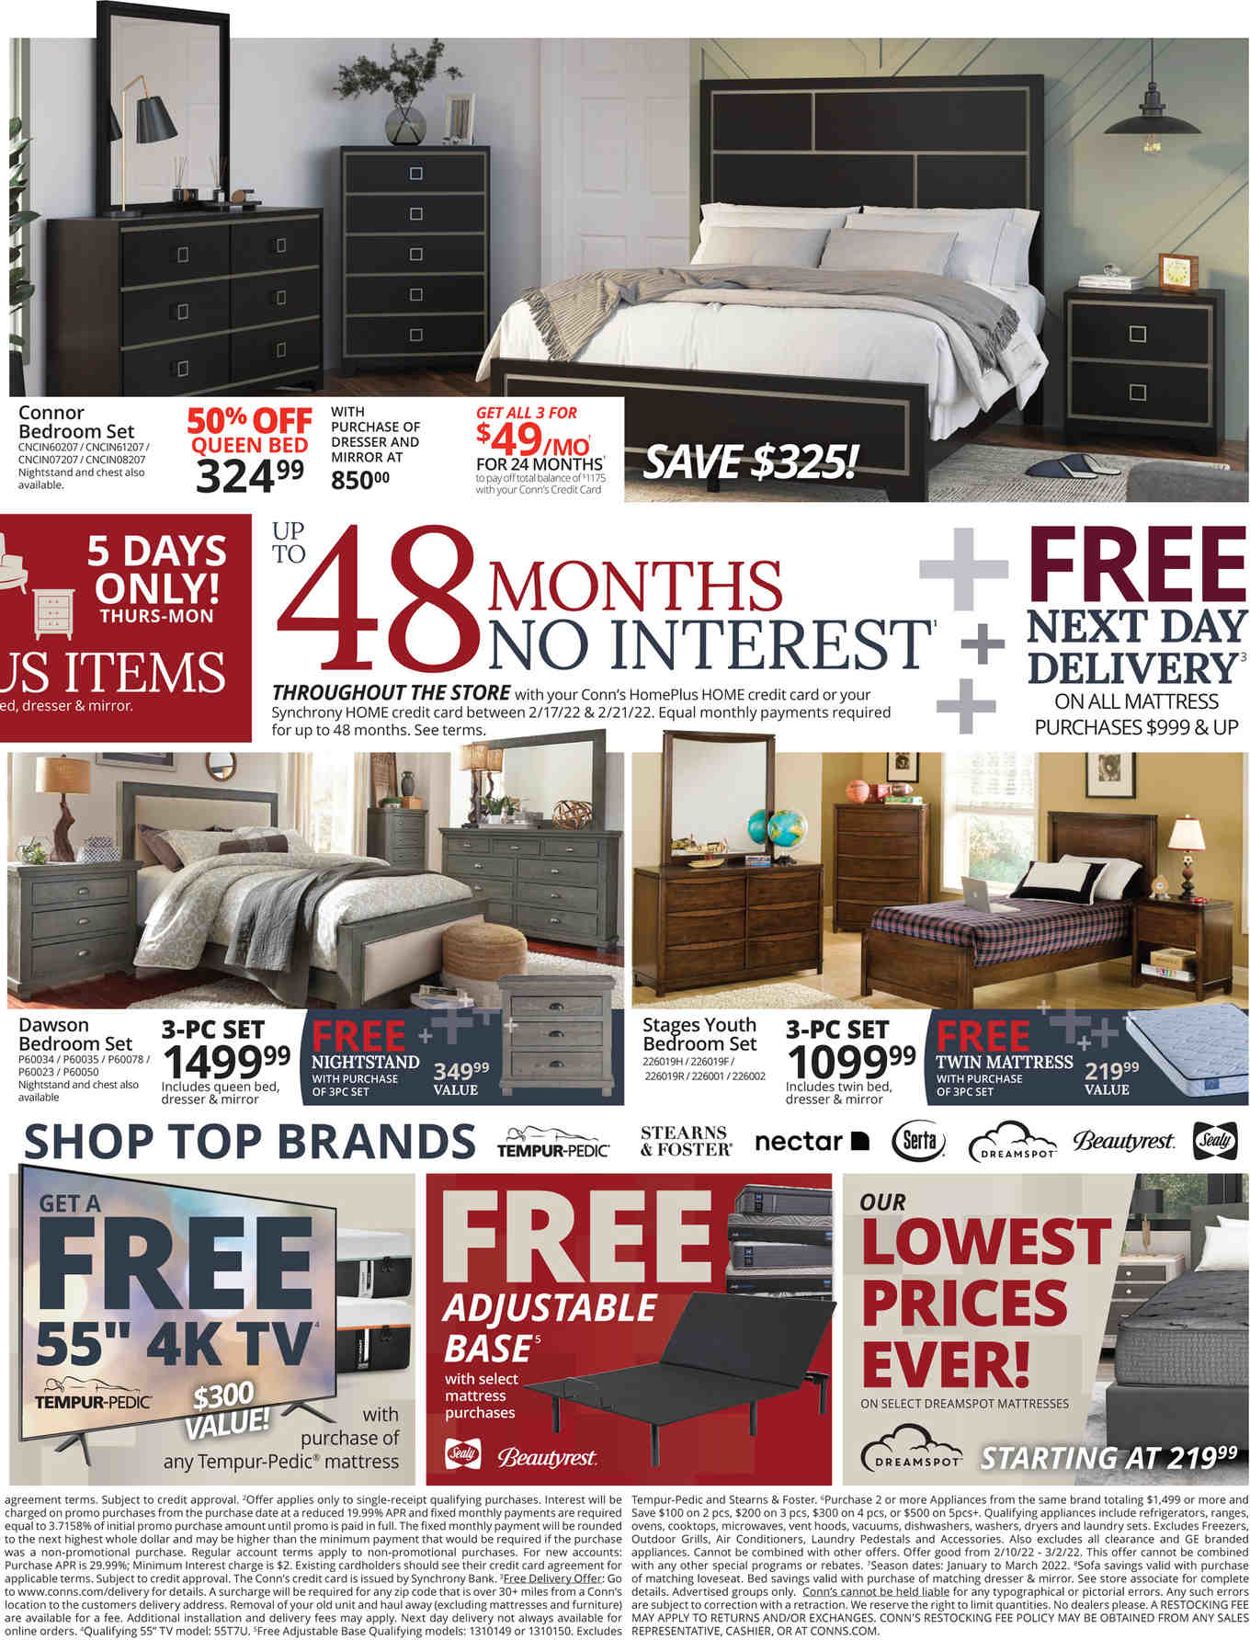 Conn's Home Plus Weekly Ad Circular - valid 02/17-02/21/2022 (Page 3)